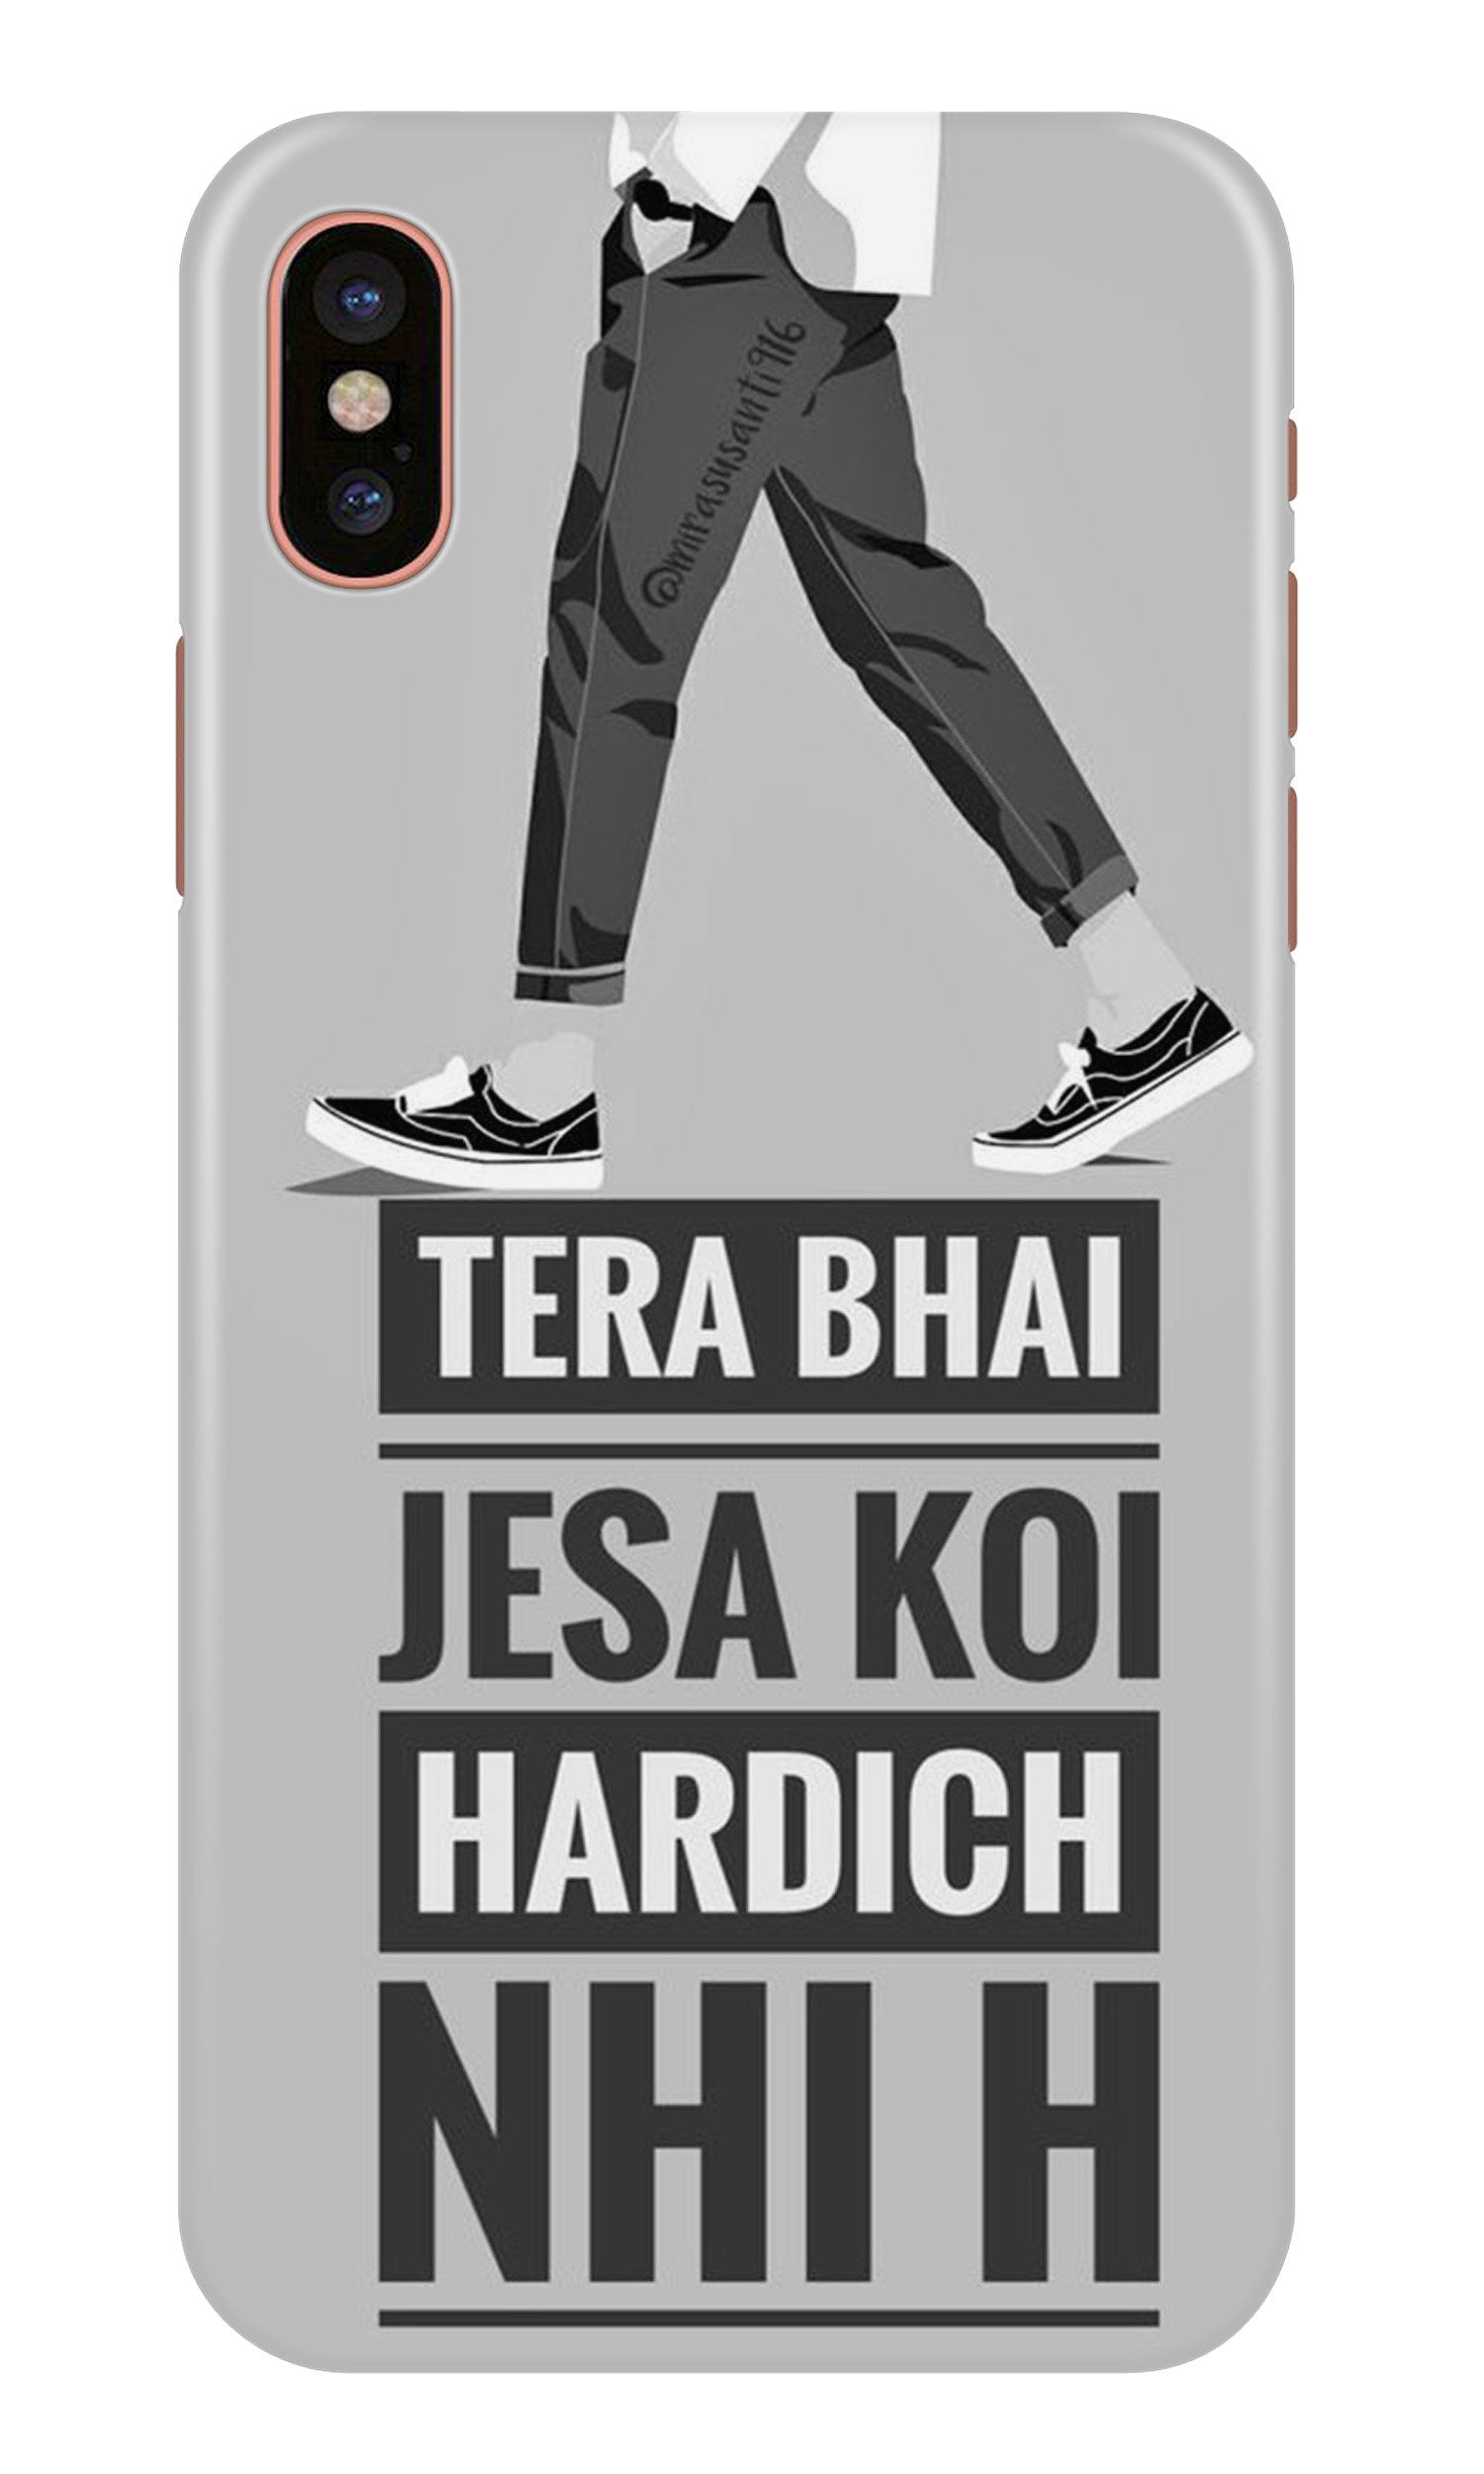 Hardich Nahi Case for iPhone Xs Max (Design No. 214)